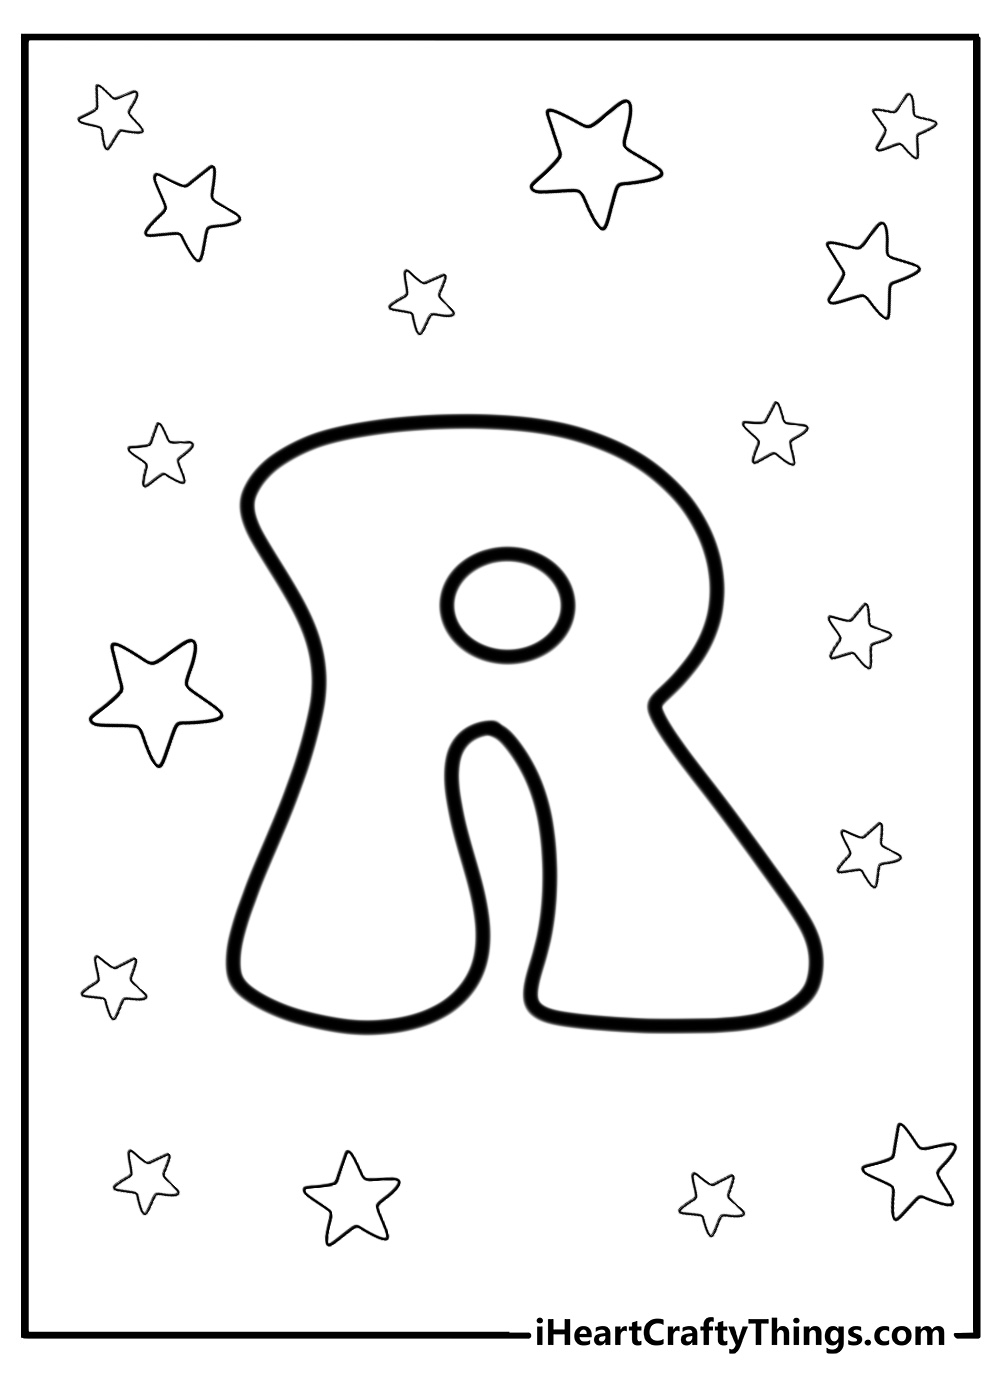 Groovy letter r coloring page